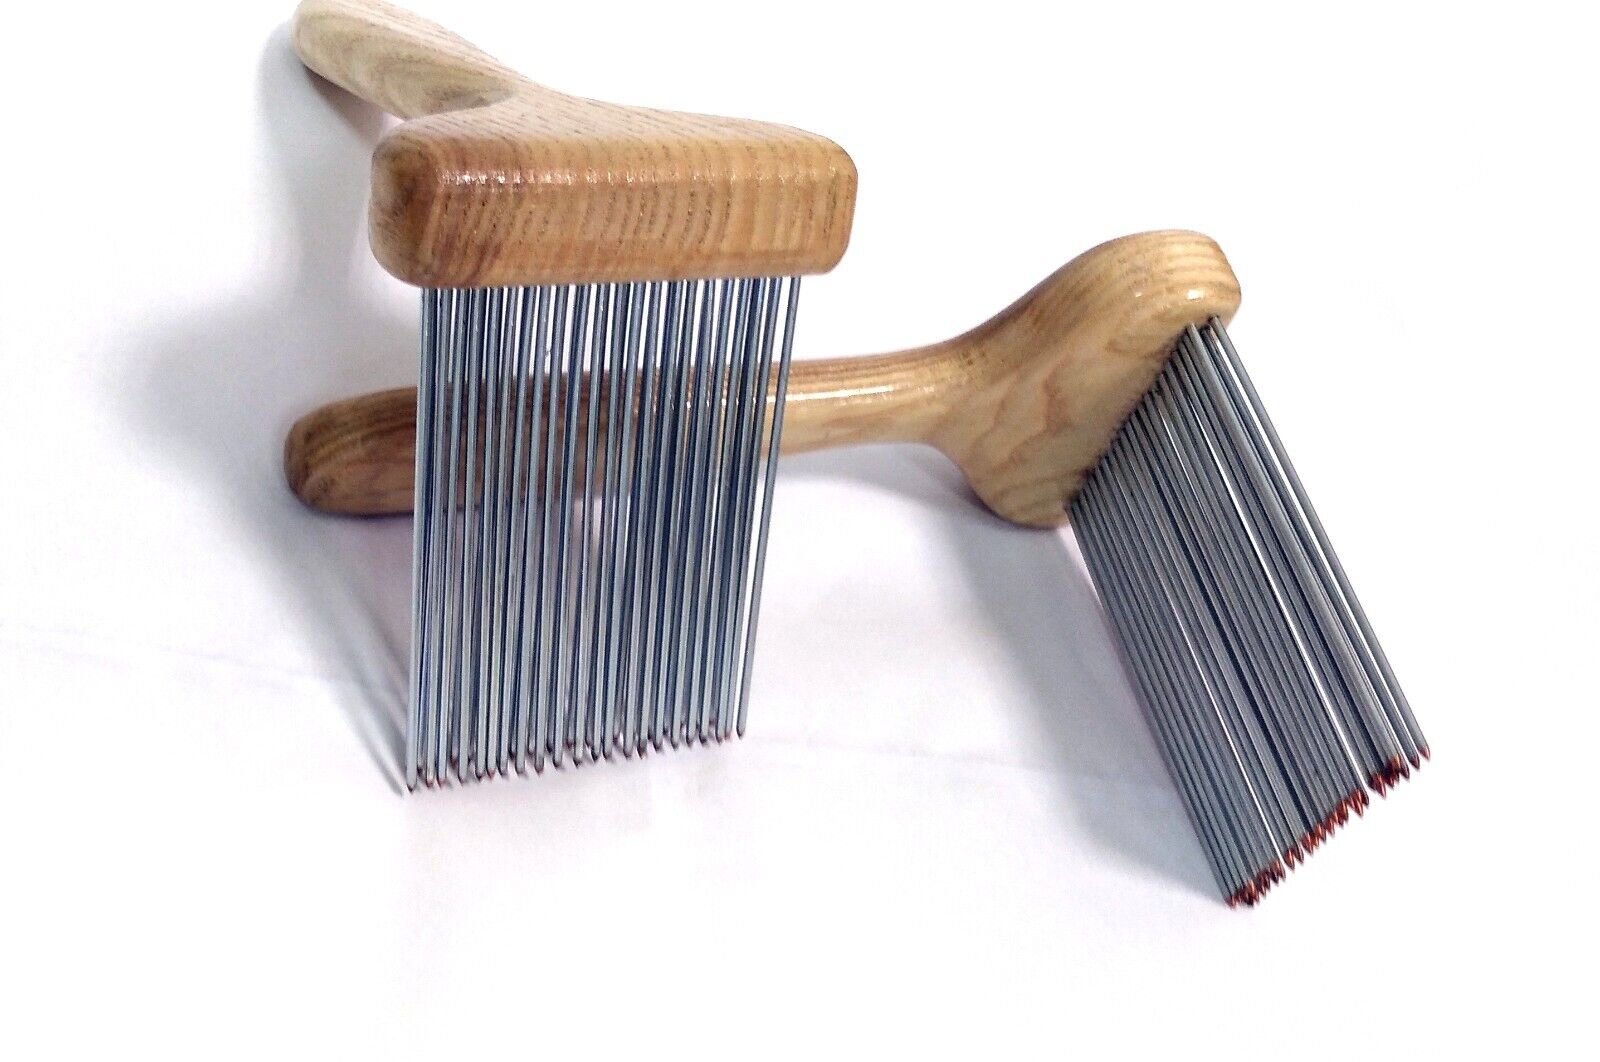 Extra Fine Wood Combs For Wool. 2 Wood Hand Viking Combs With 2 Rows